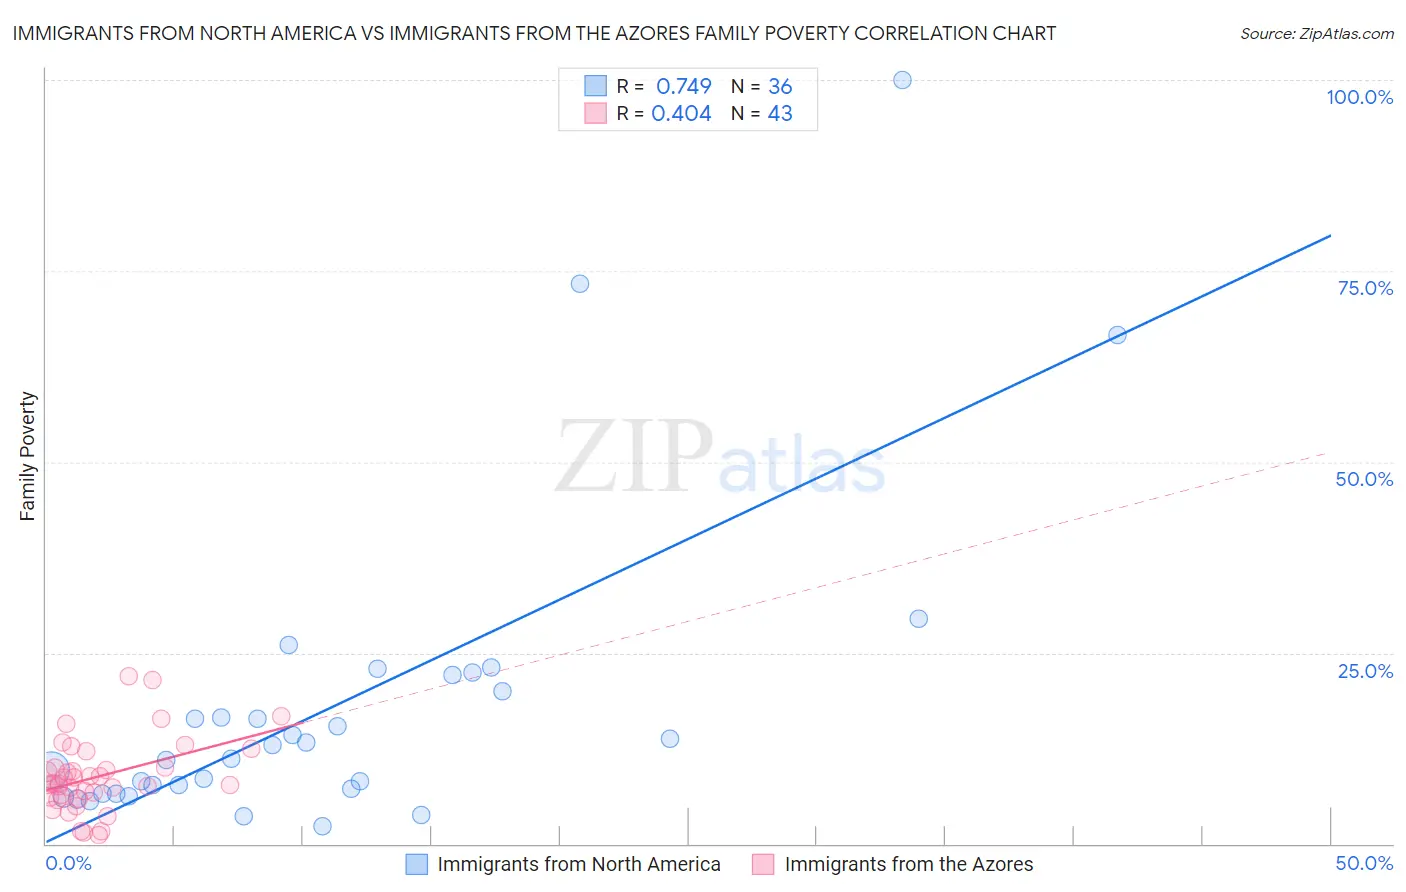 Immigrants from North America vs Immigrants from the Azores Family Poverty